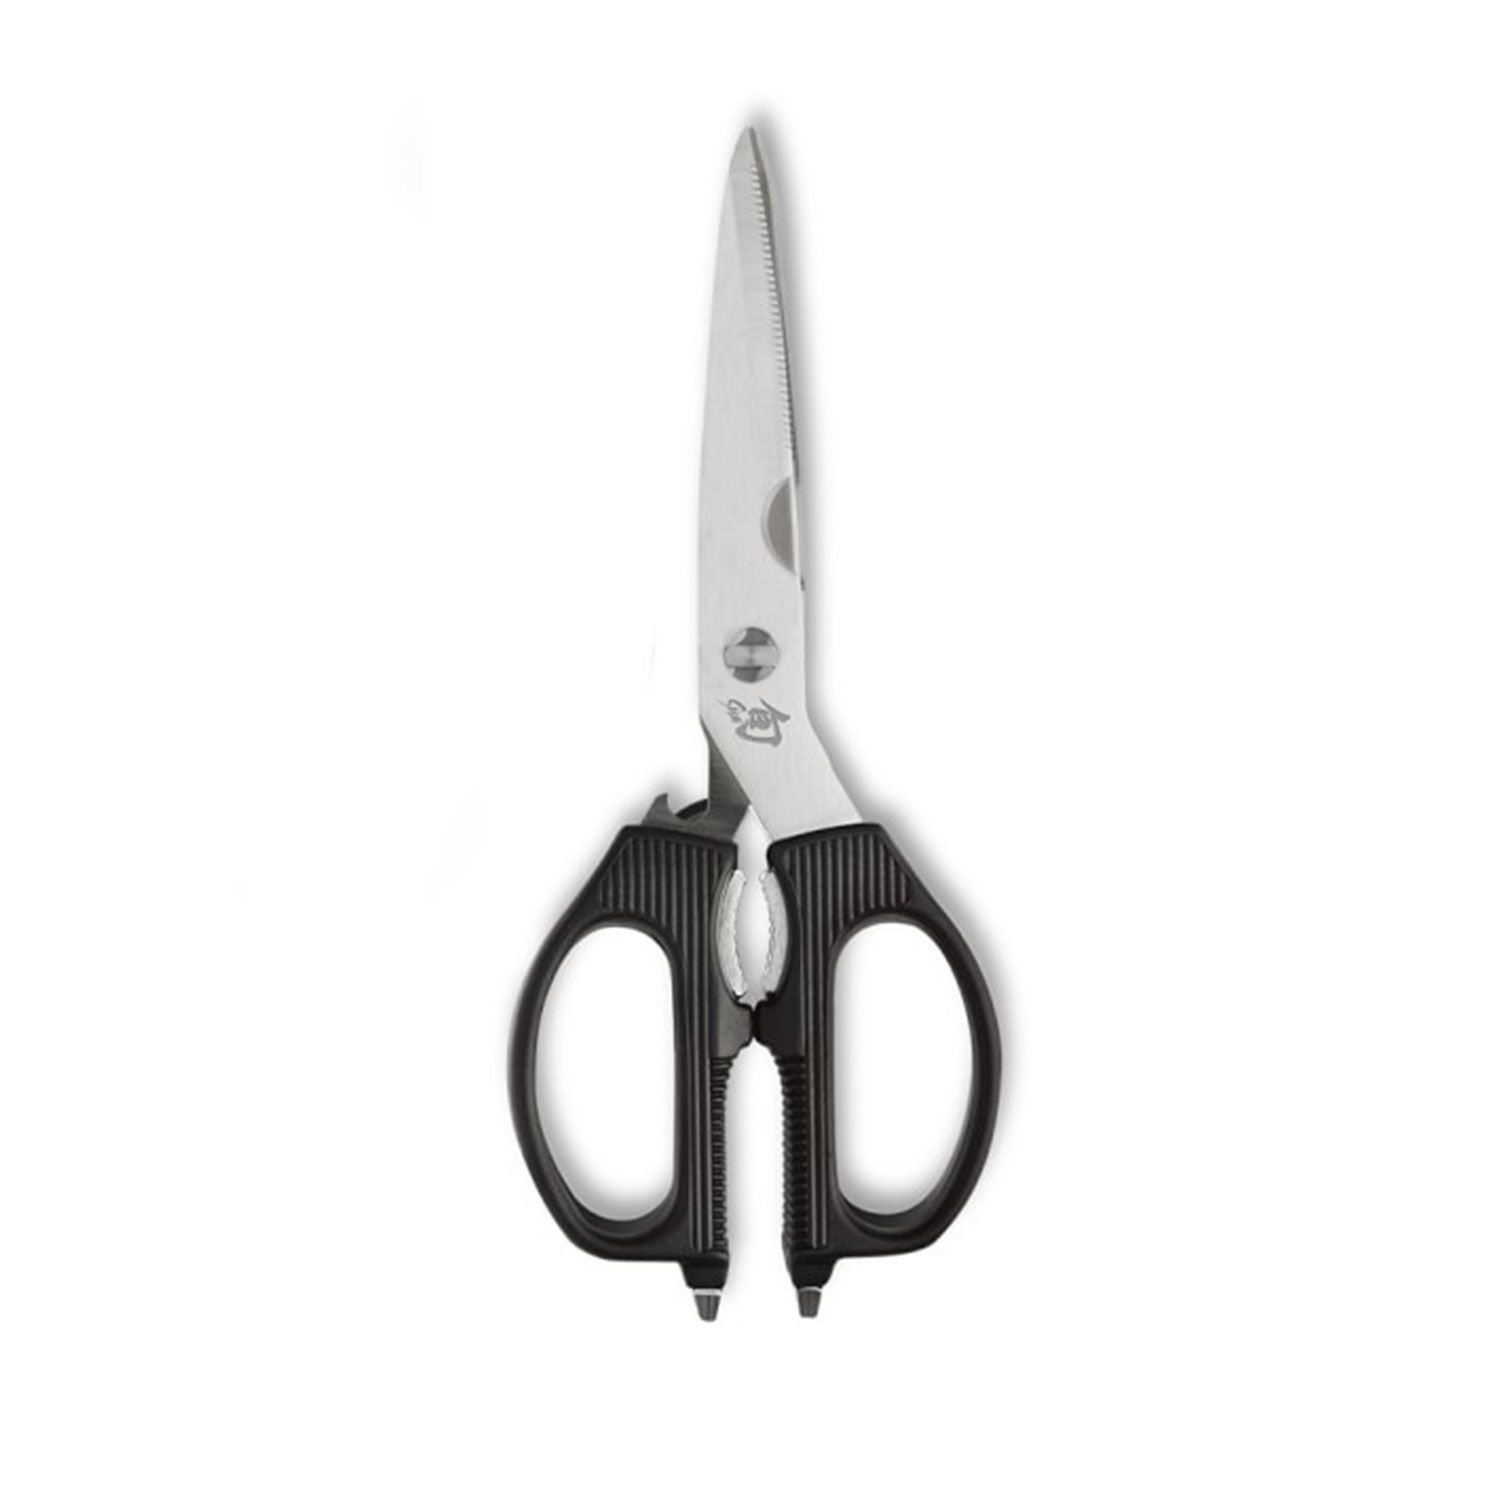 8 Best Kitchen Shears For 2021 According To Customer Reviews Allrecipes